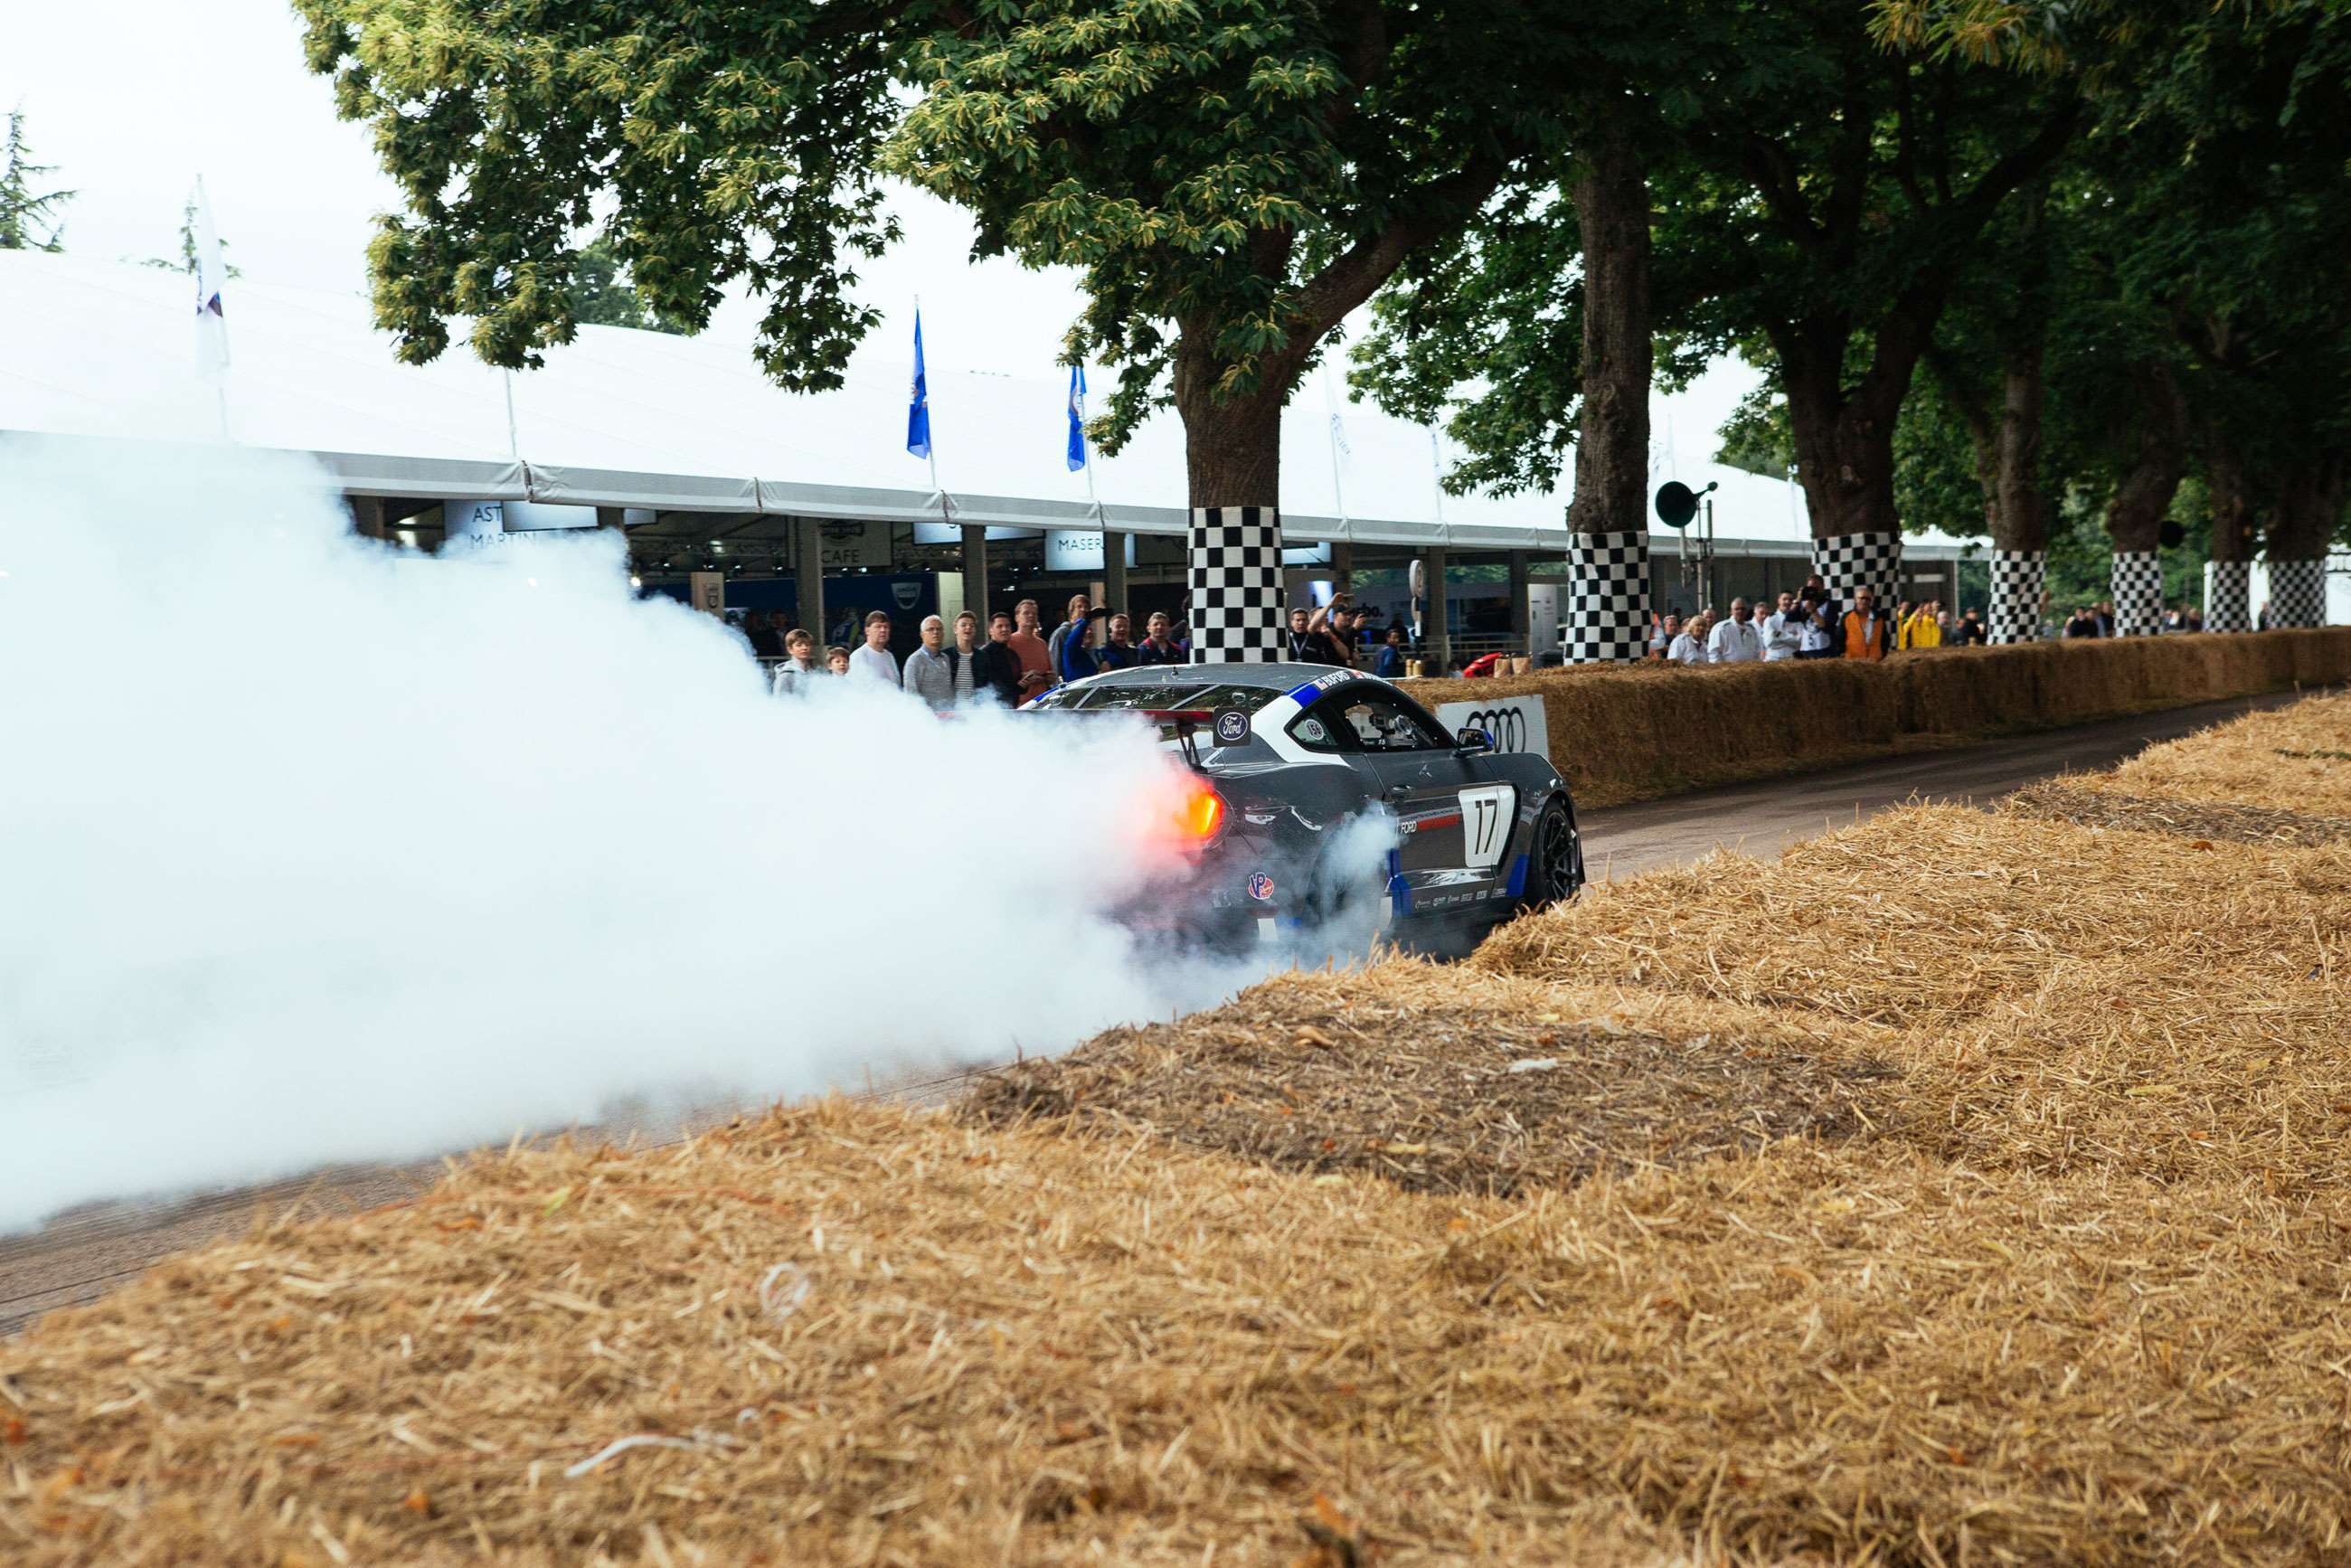 where-to-stand-at-the-festival-of-speed-startline-sam-todd-fos-2017-goodwood-30062021.jpg